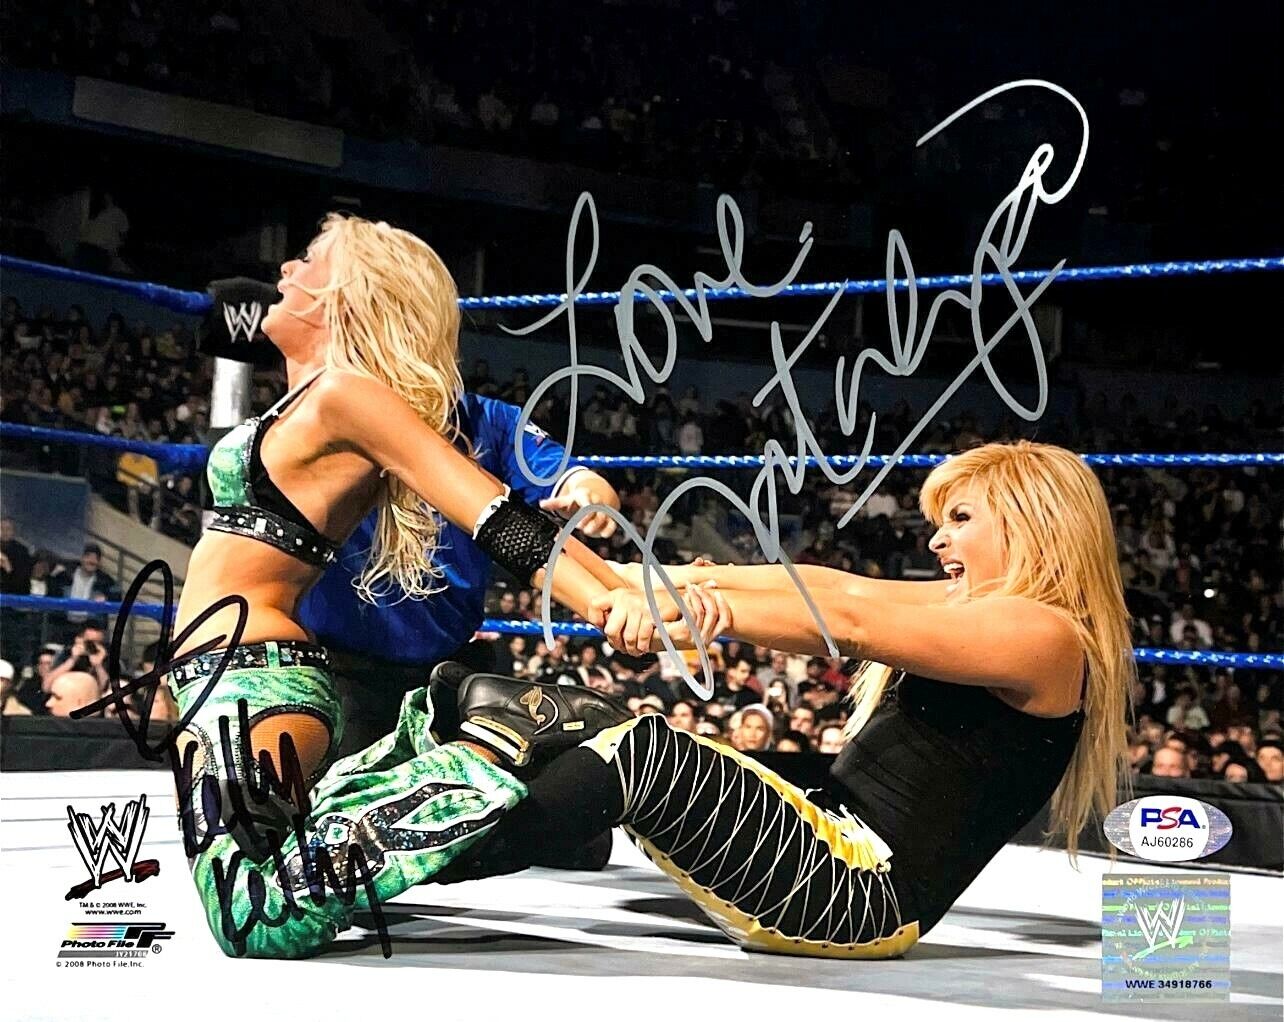 WWE NATALYA AND KELLY KELLY HAND SIGNED AUTOGRAPHED 8X10 Photo Poster painting WITH PSA DNA COA